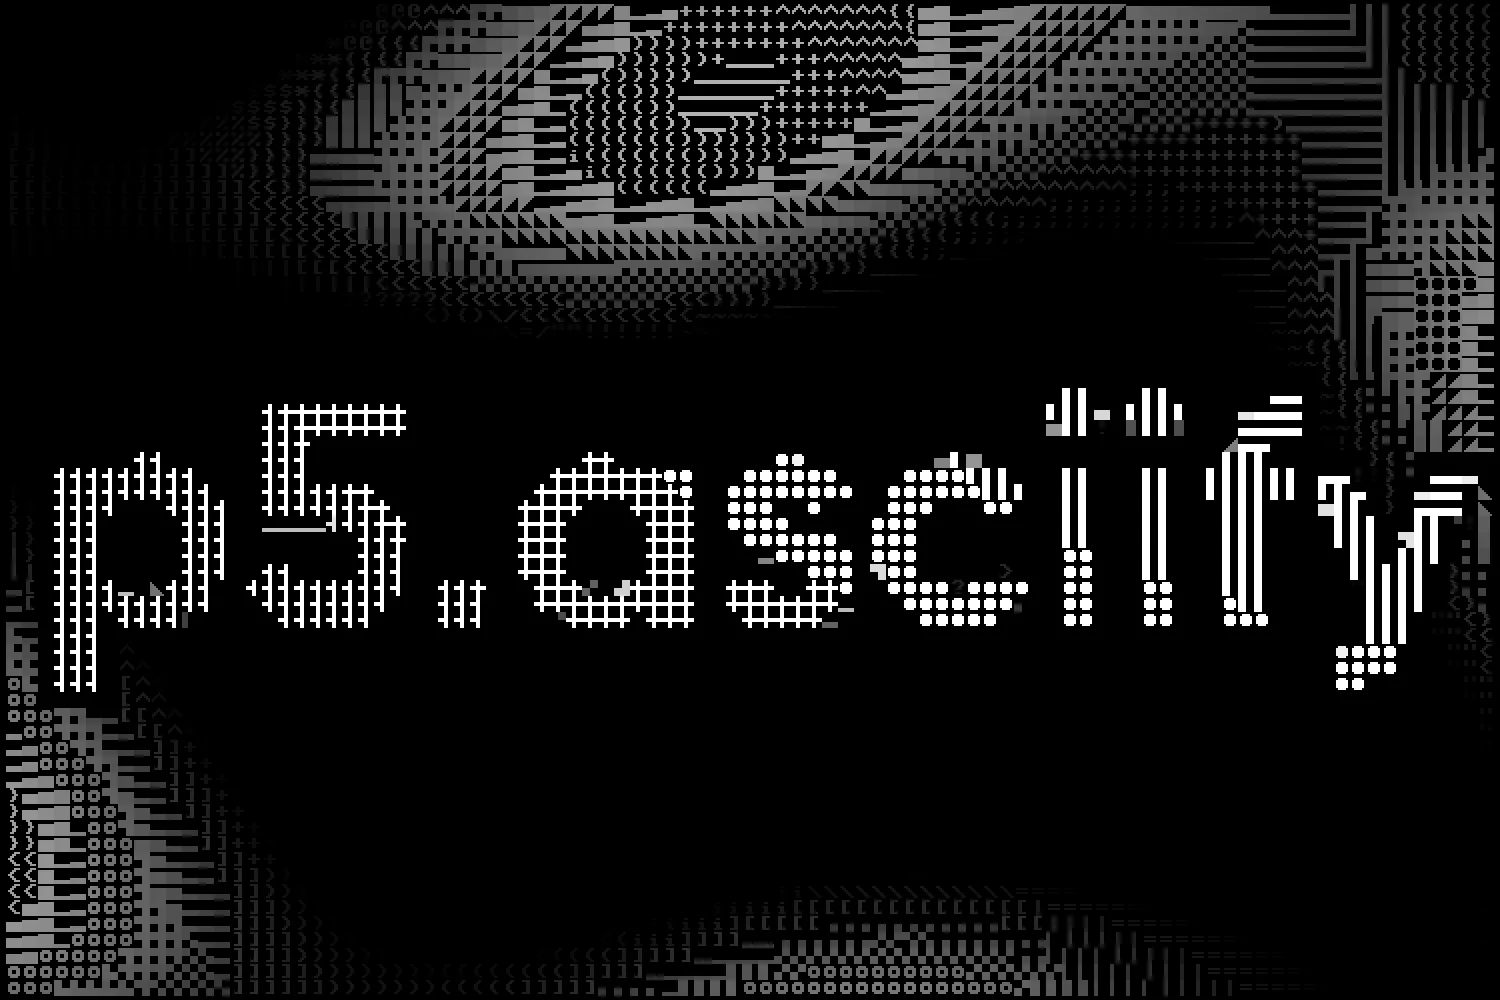 A grid of ASCII characters representing perlin noise, with a centered logo reading "p5.asciify".